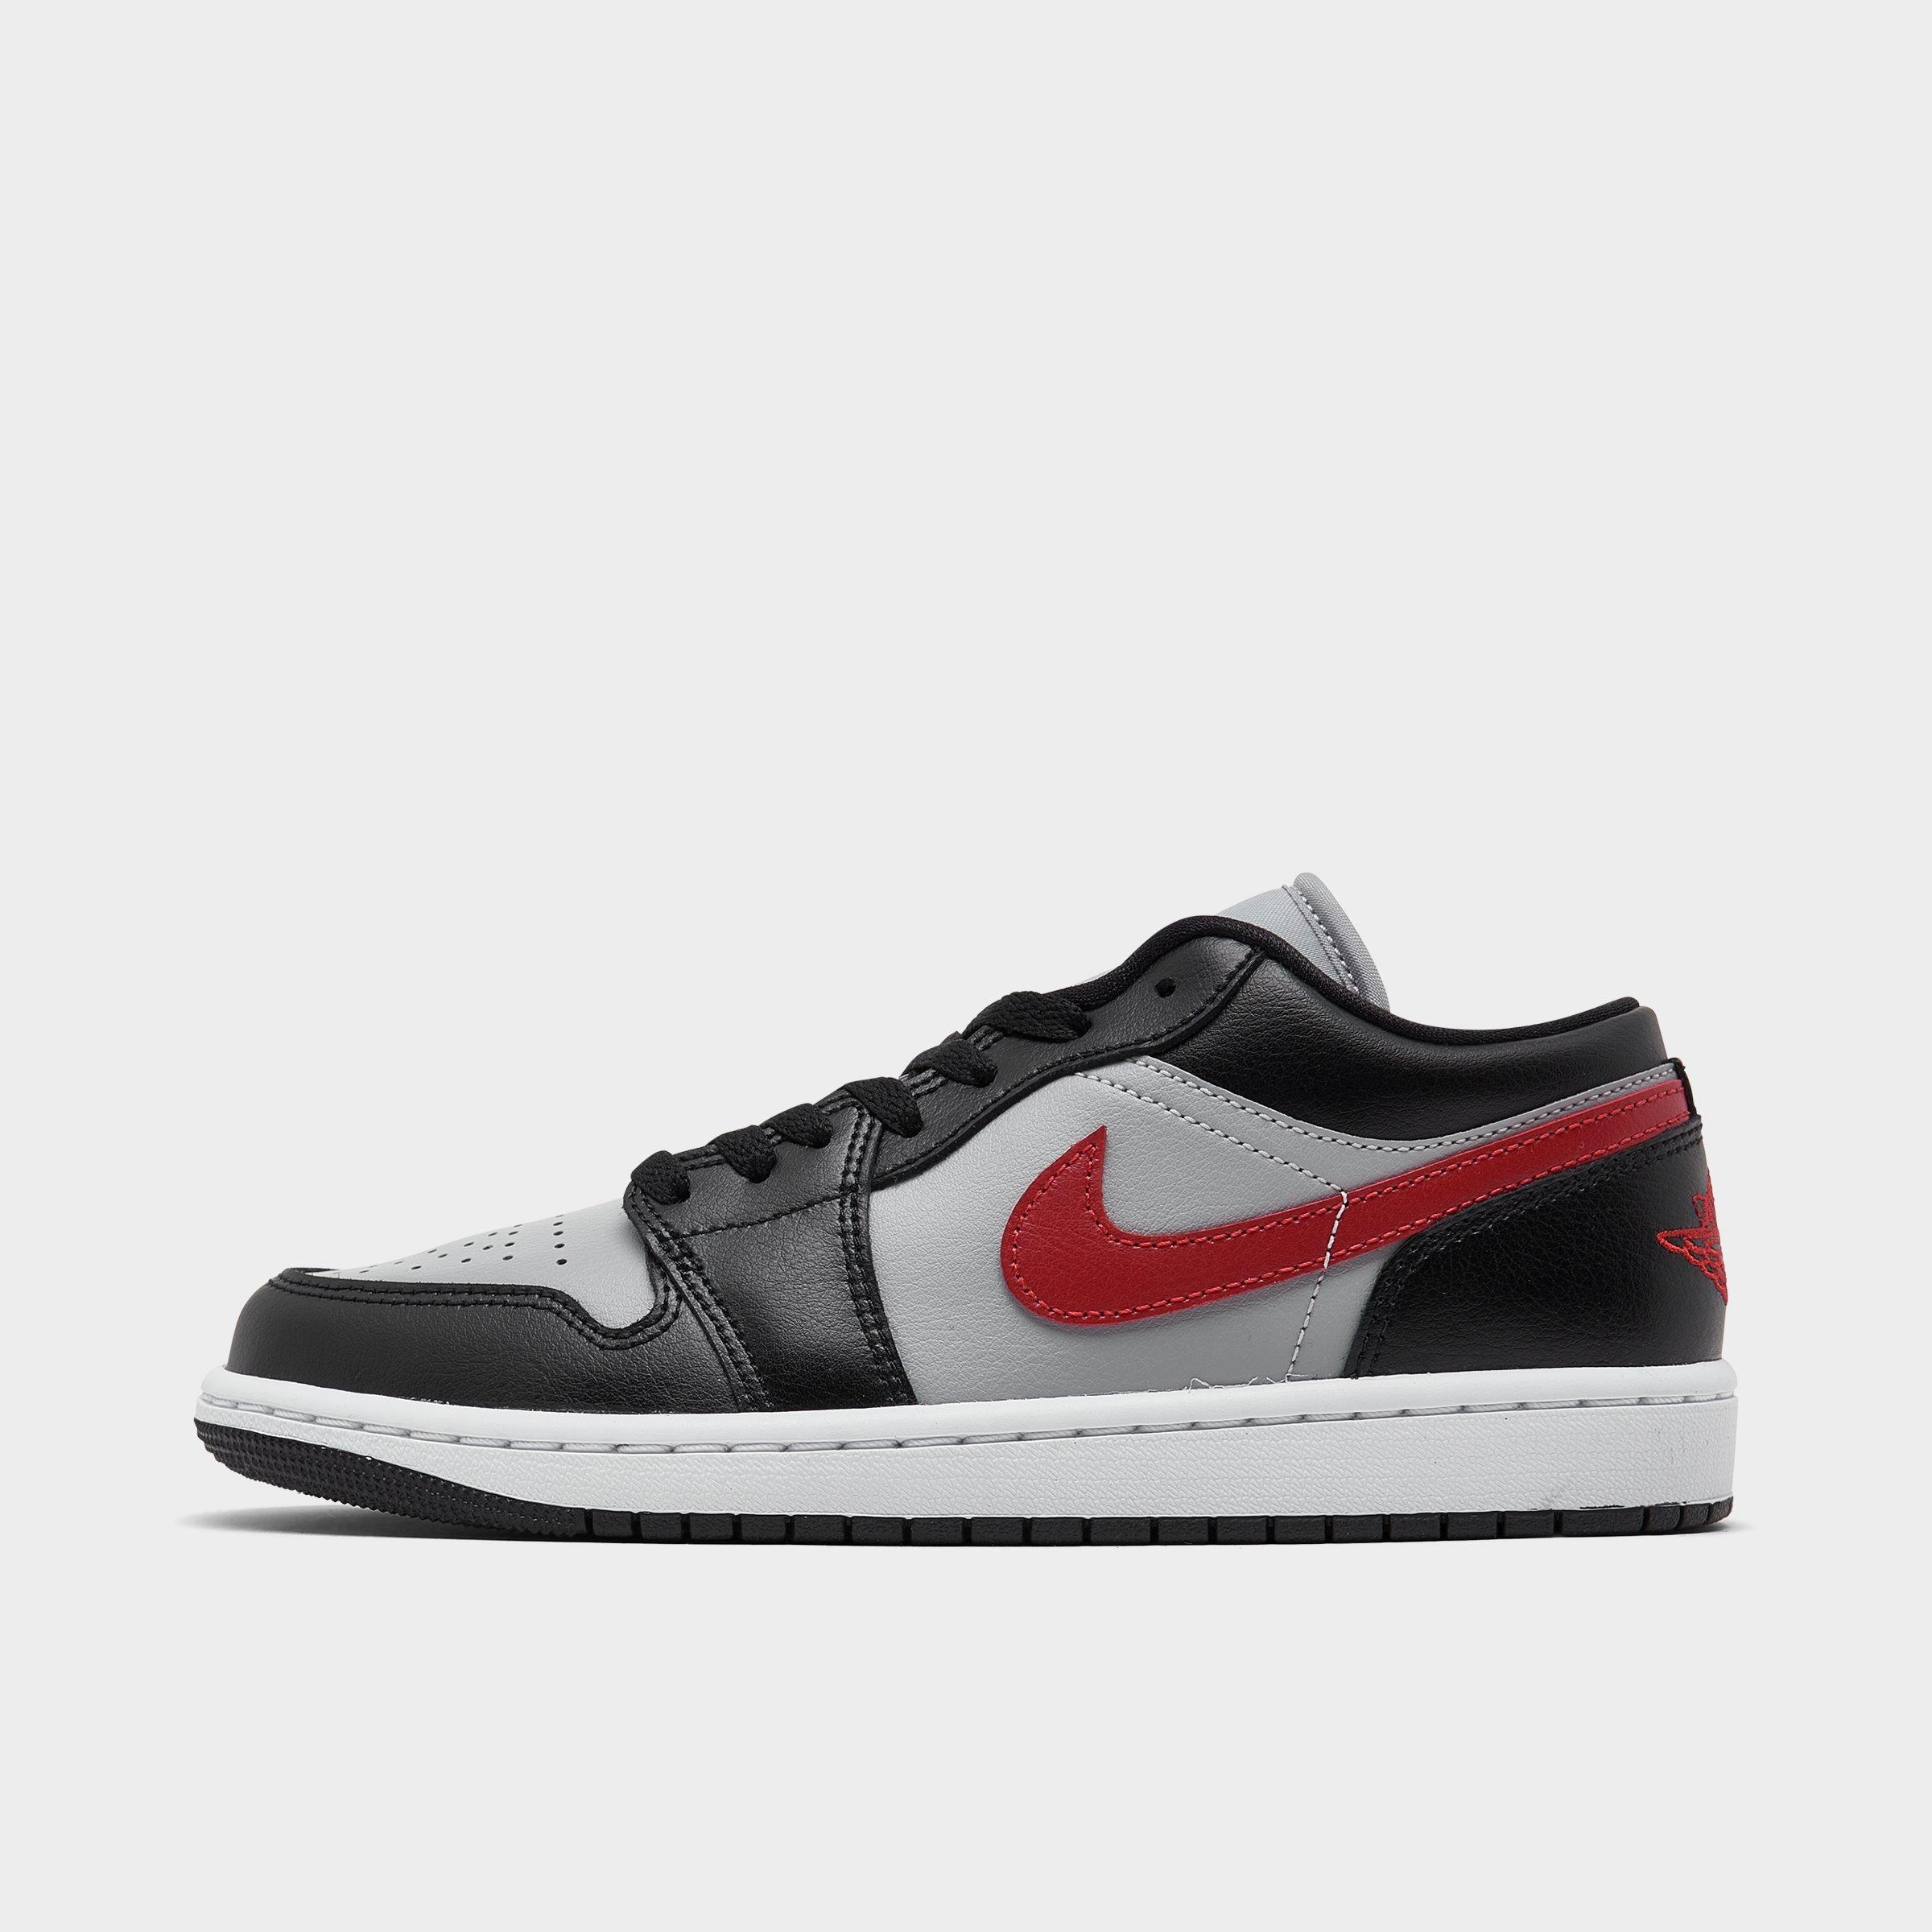 Nike Jordan Women's Air Retro 1 Low Casual Shoes In Wolf Grey/gym Red/black/white